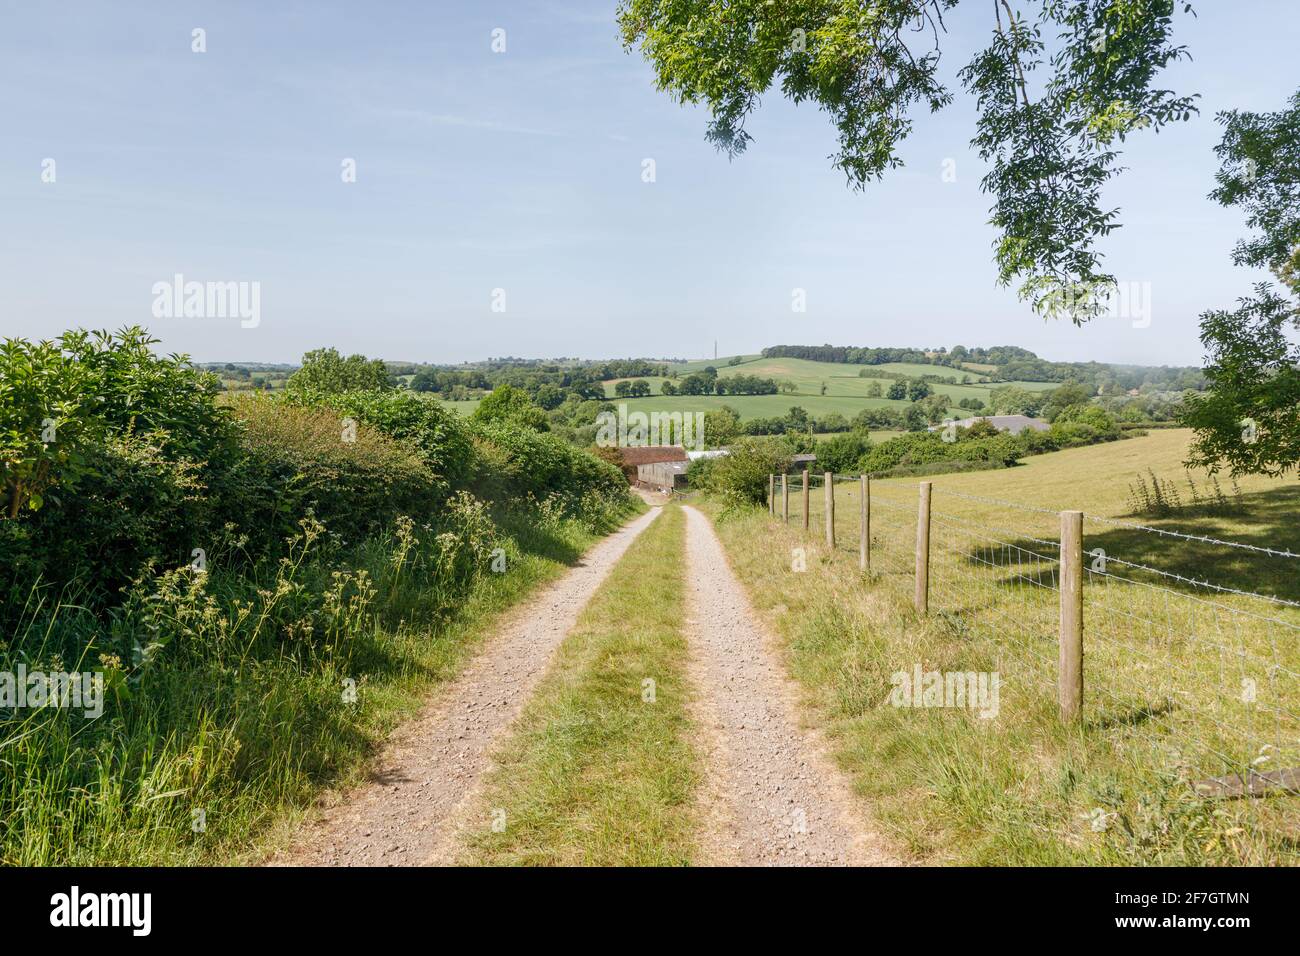 Badby, Northamptonshire, UK - May 28th 2020: An unmetalled track between a hedge and a fence leads down a hill towards some farm buildings. Stock Photo